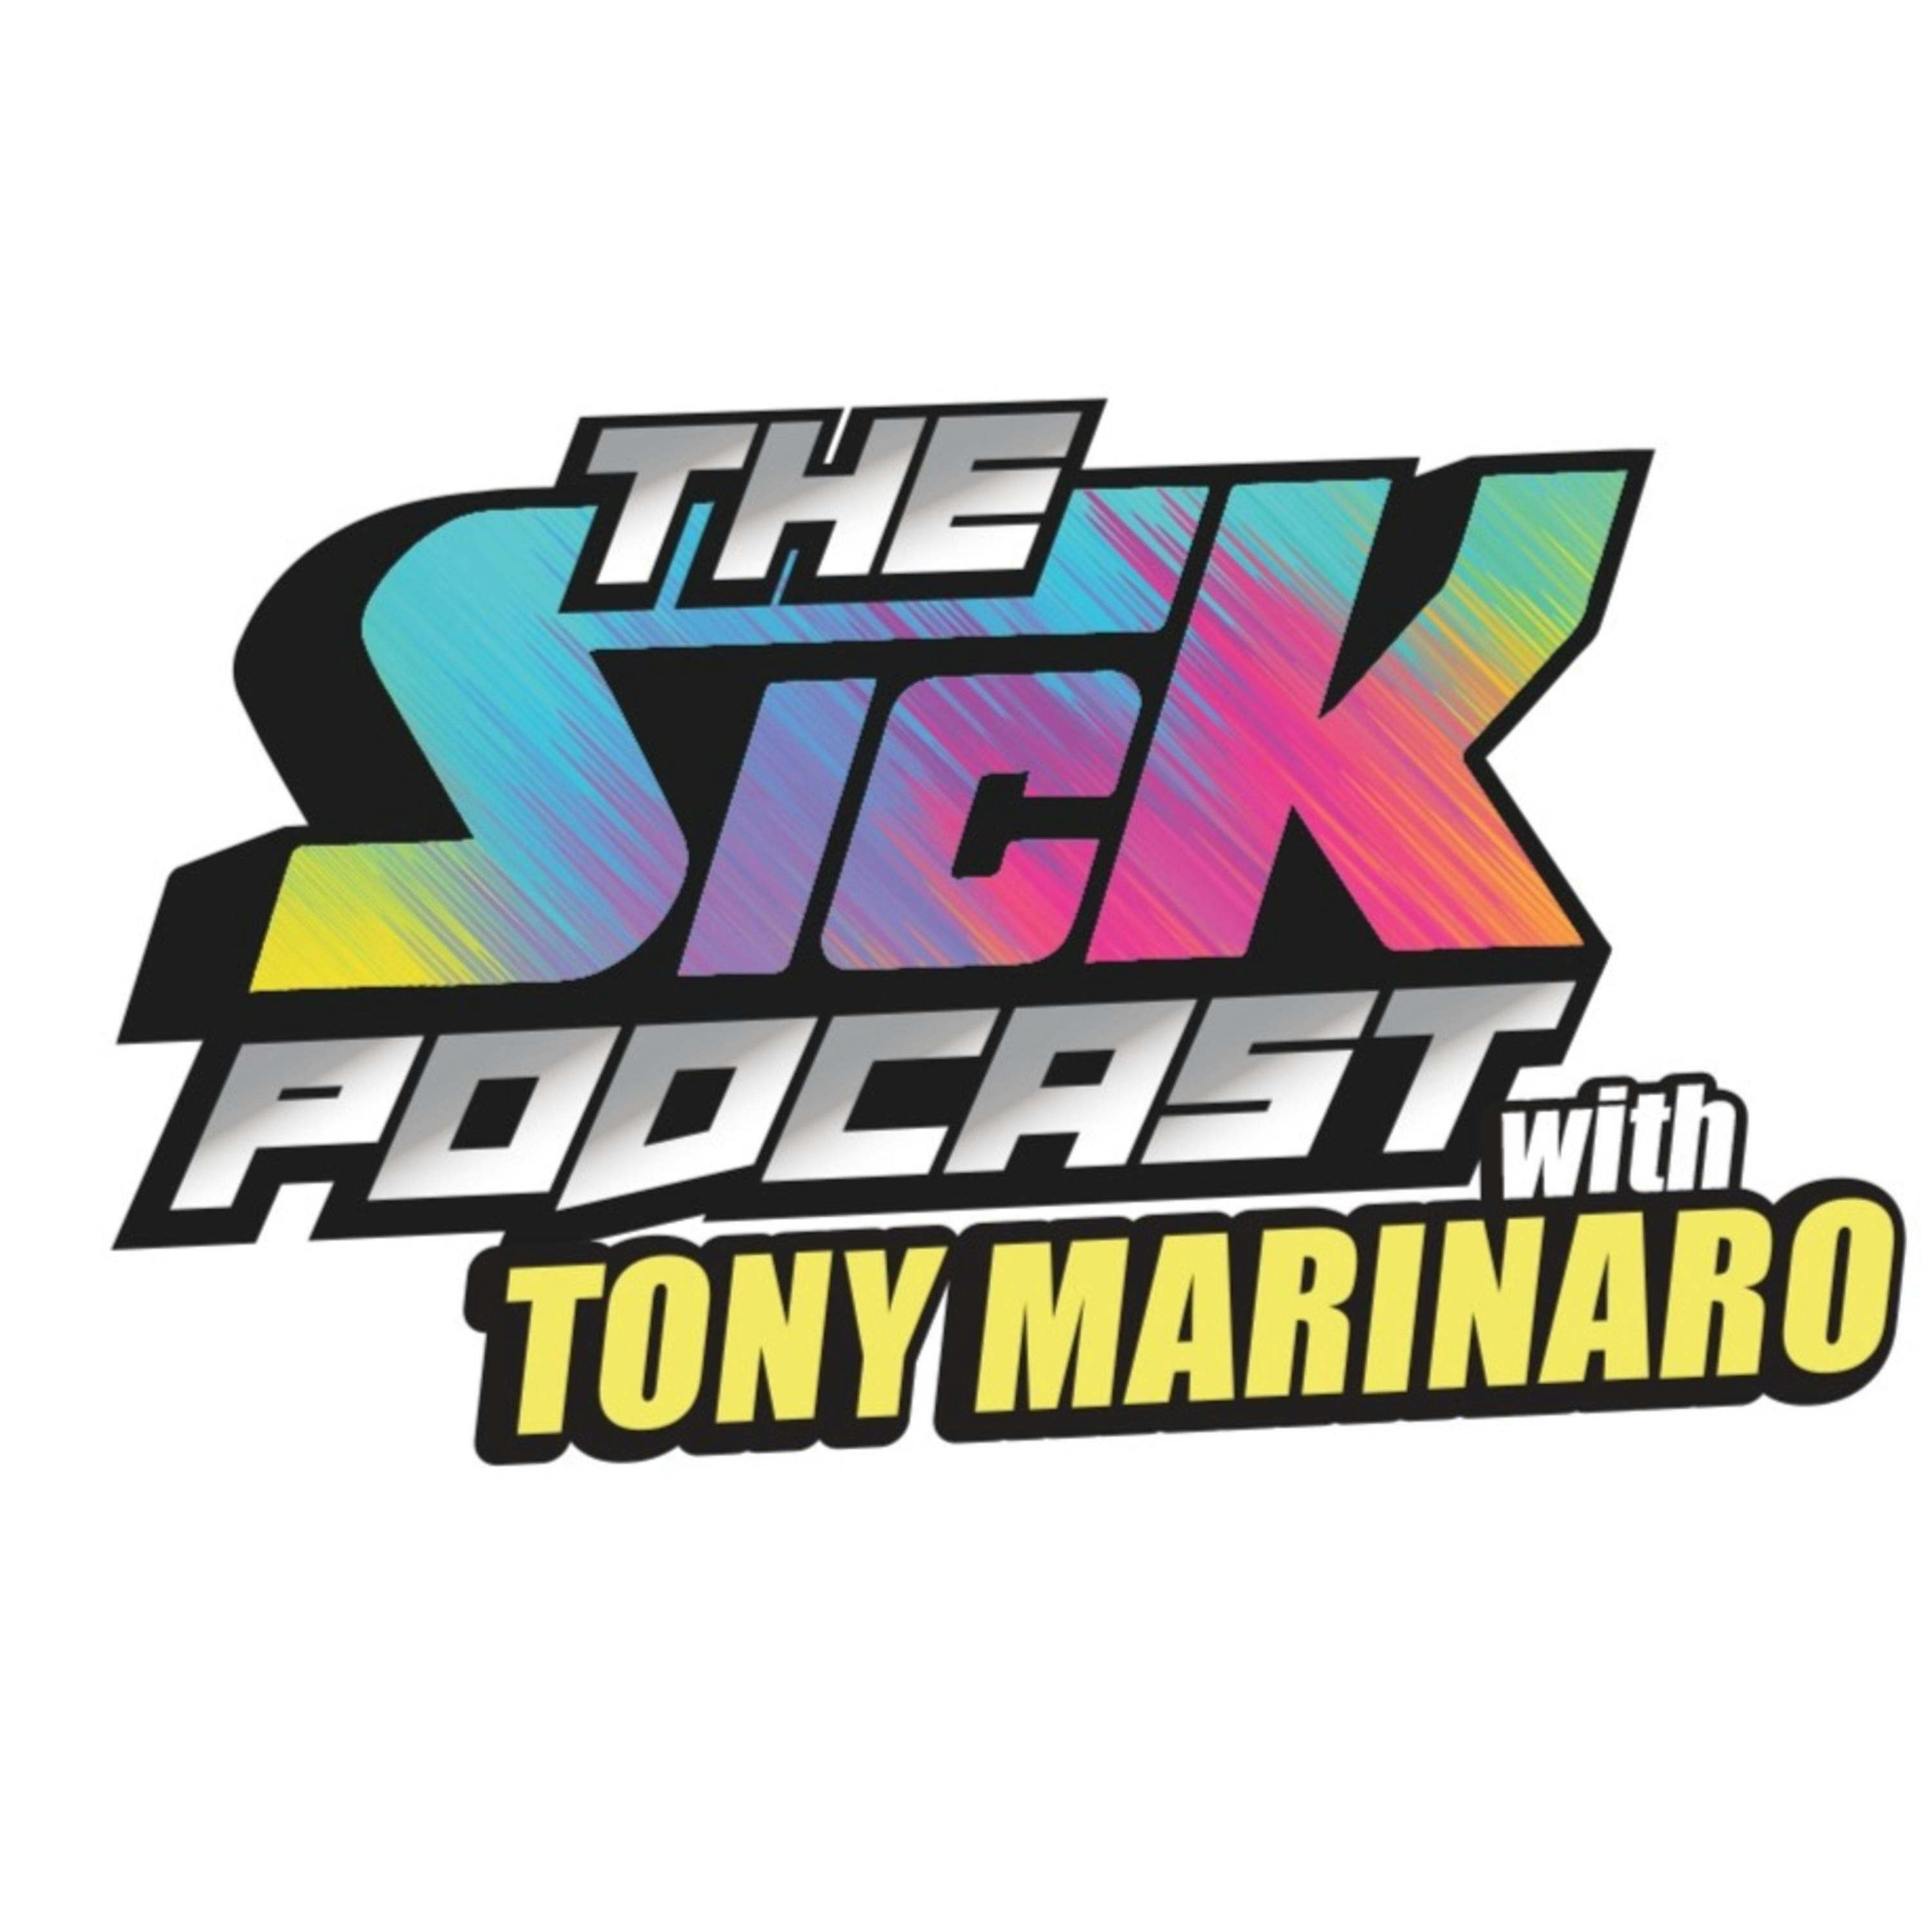 St-Louis Says His Players Are Like Puppies | The Sick Podcast with Tony Marinaro January 11 2023